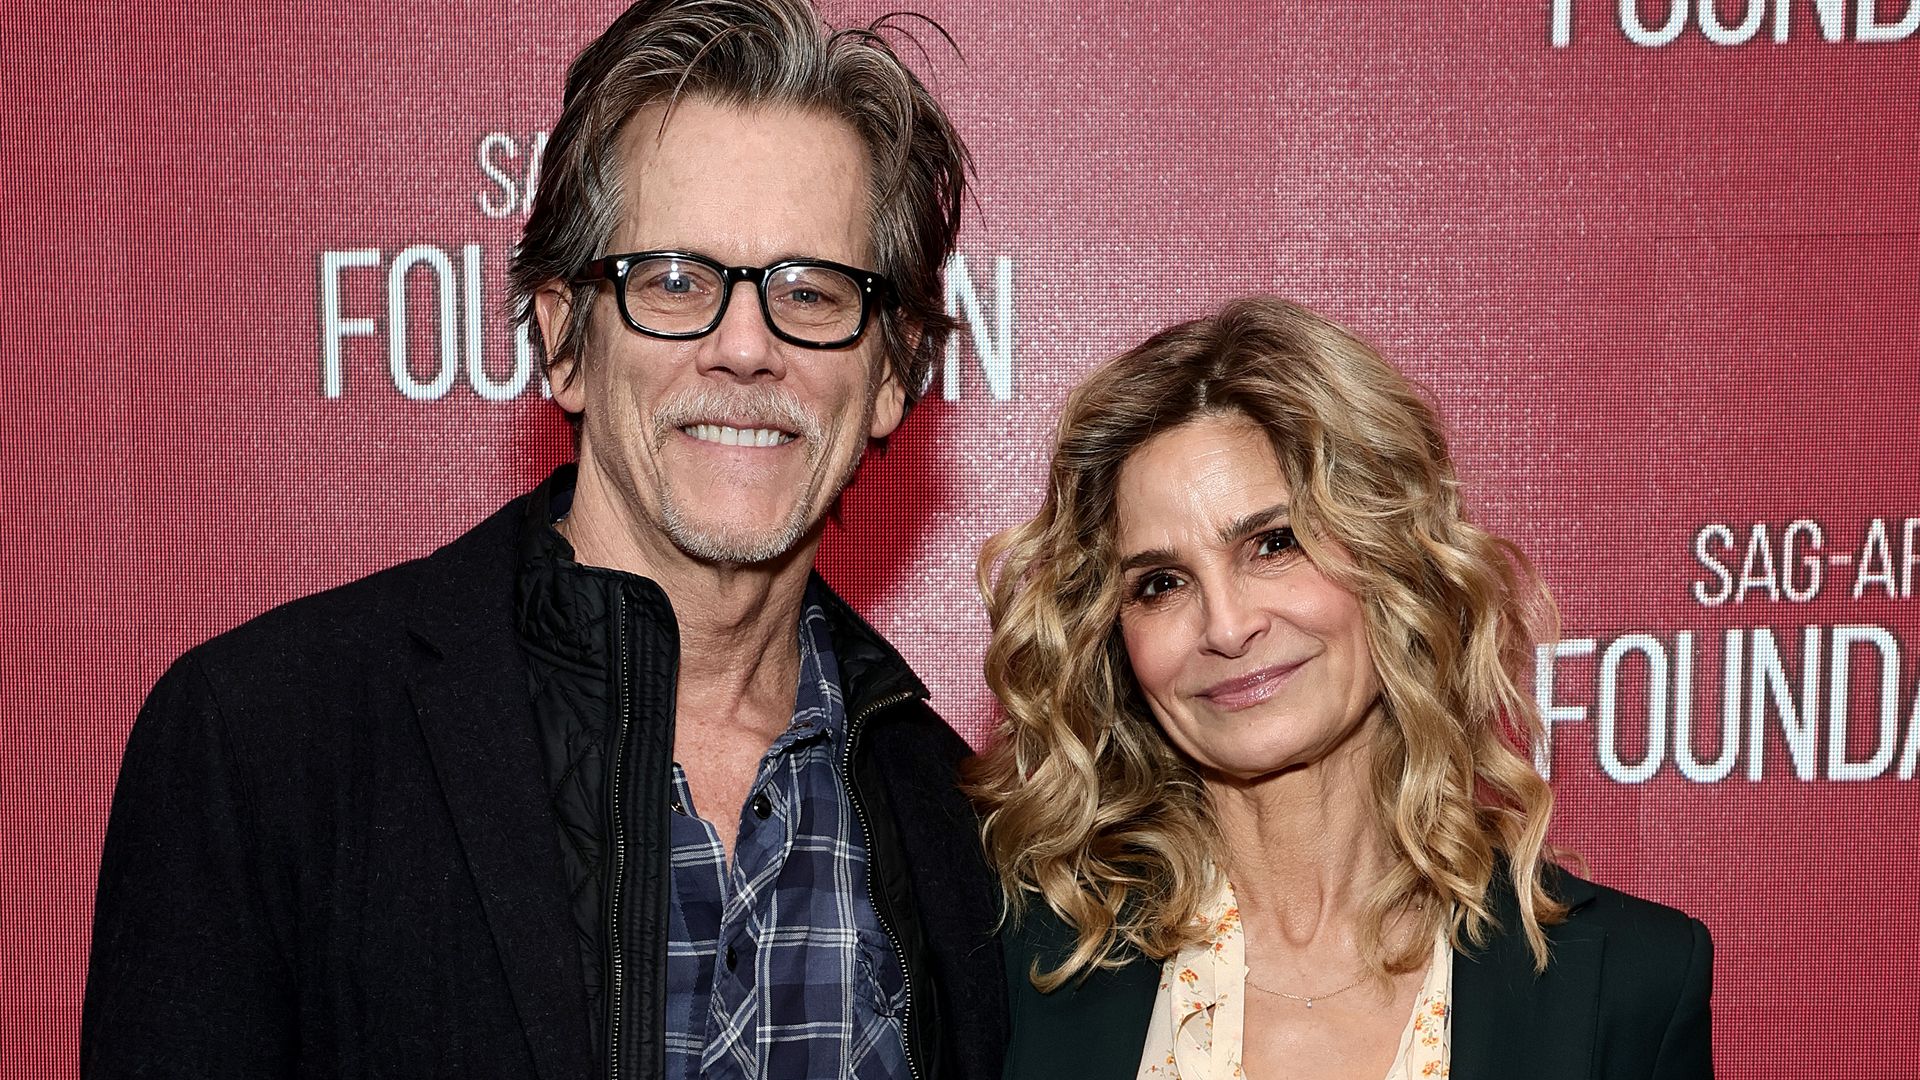 Kyra Sedgwick and Kevin Bacon smiling on a red carpet